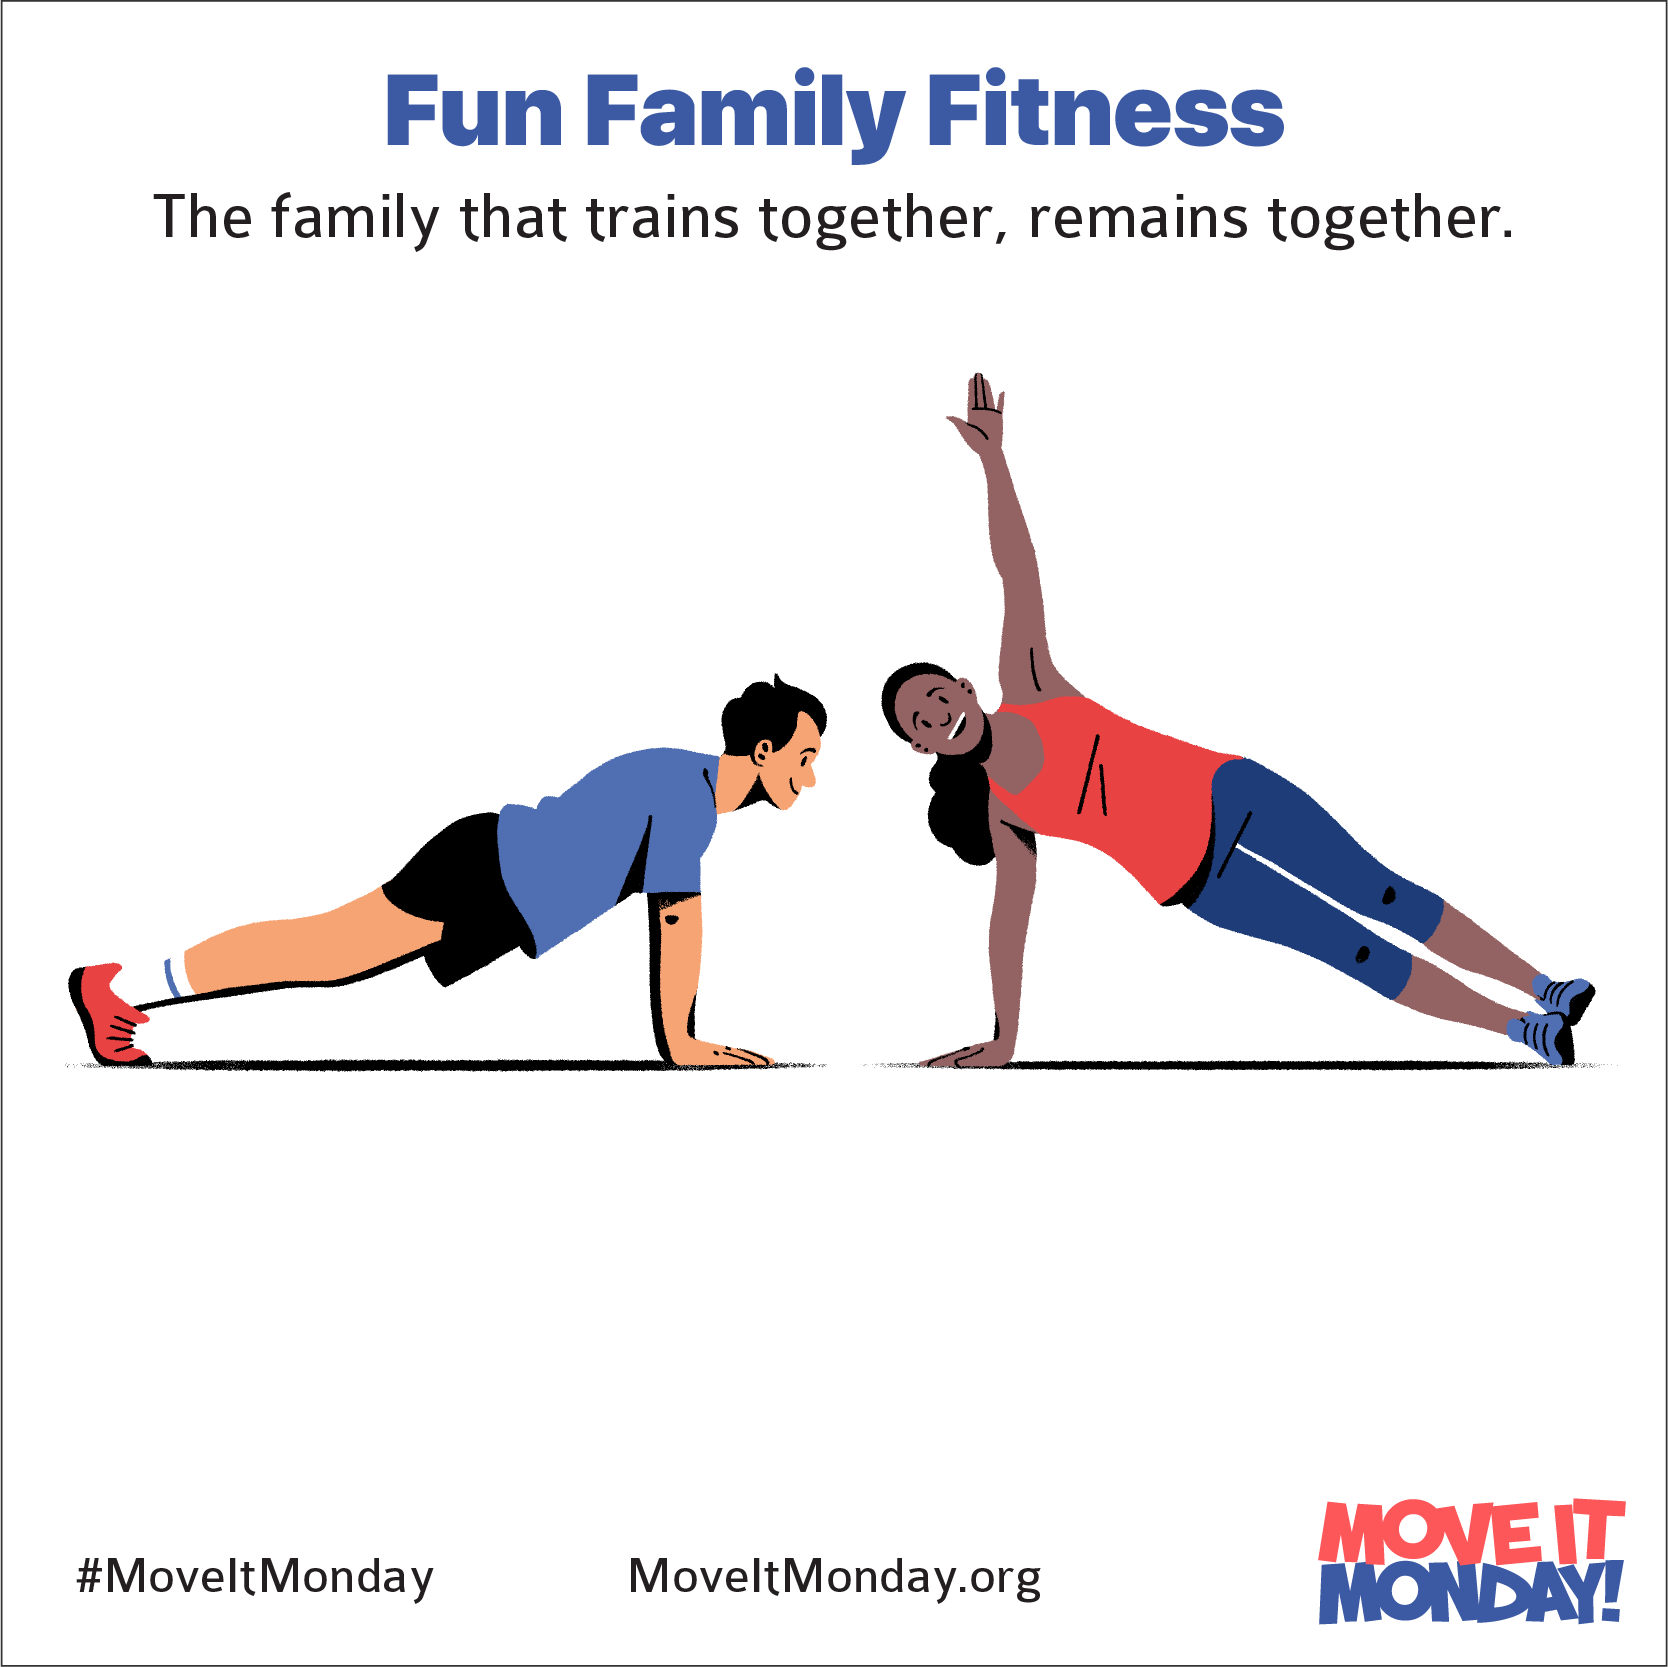 5 Fitness Challenges to Get the Whole Family Moving